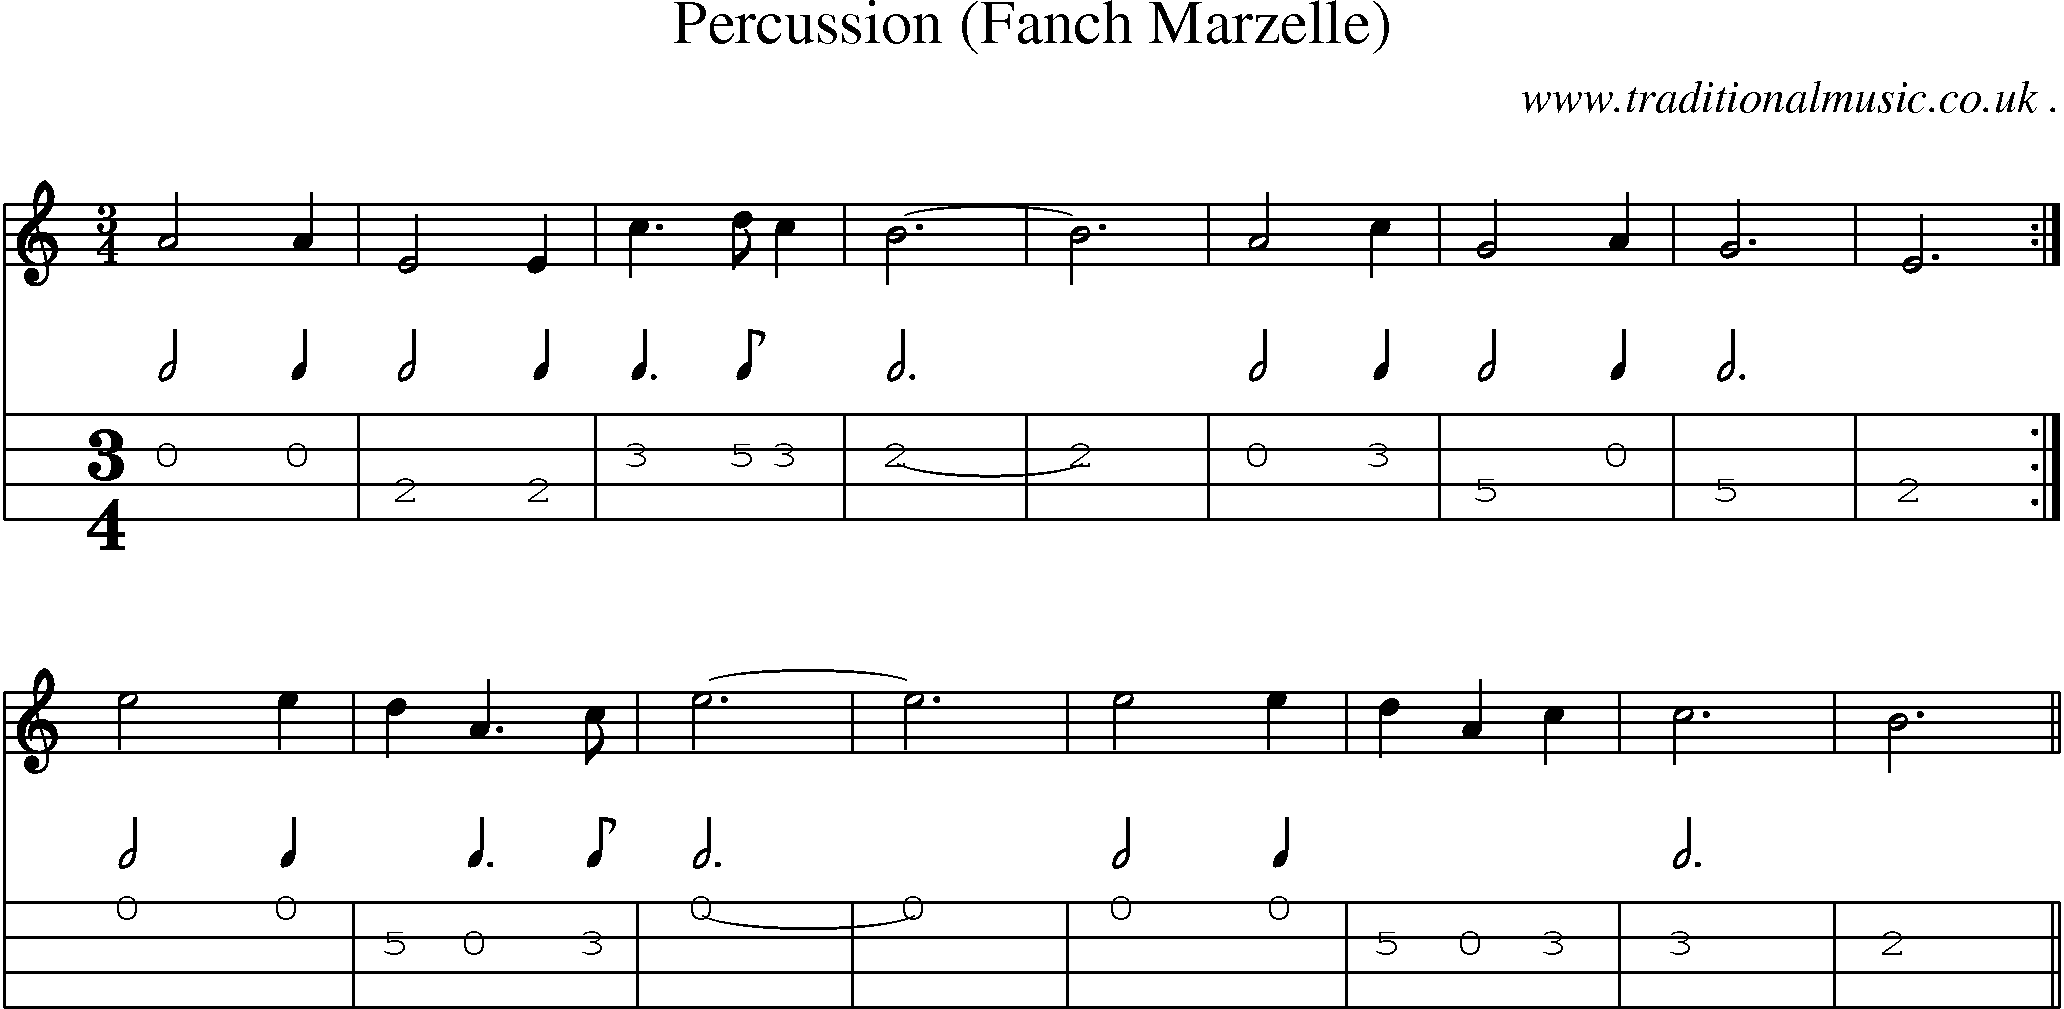 Sheet-Music and Mandolin Tabs for Percussion (fanch Marzelle)